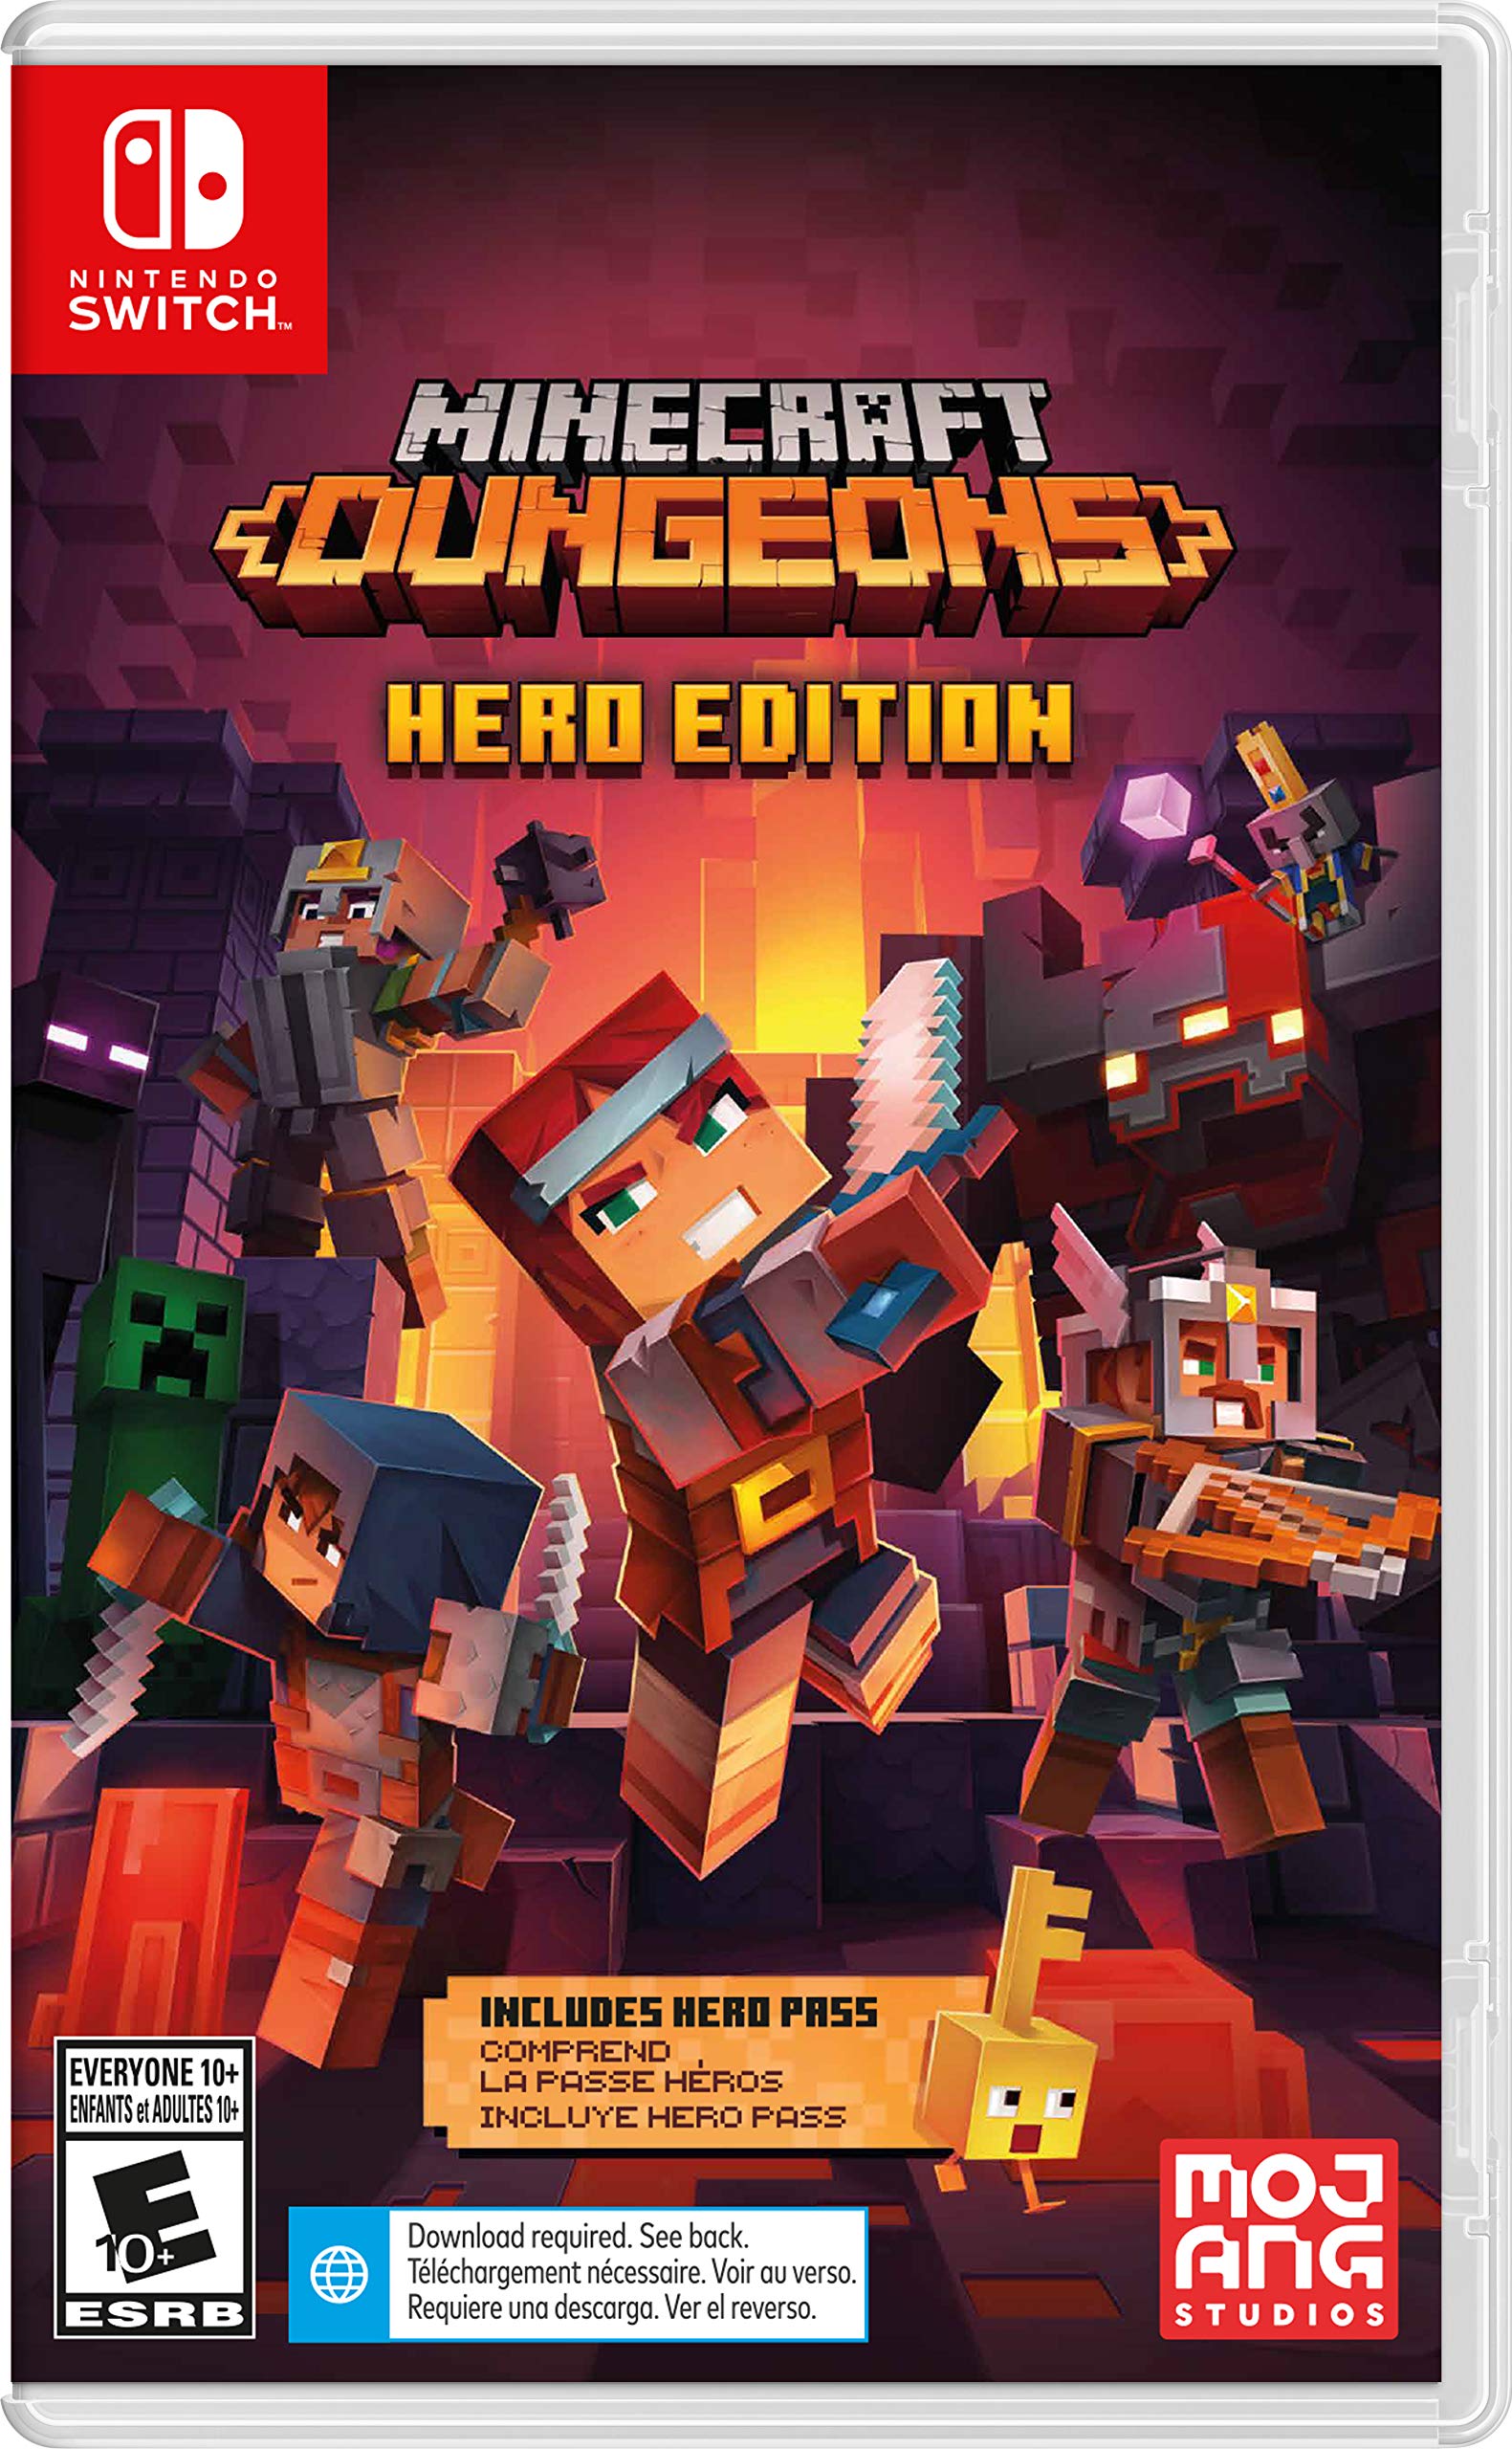 Kids’ Game Club – Minecraft Dungeons: Heroes Edition